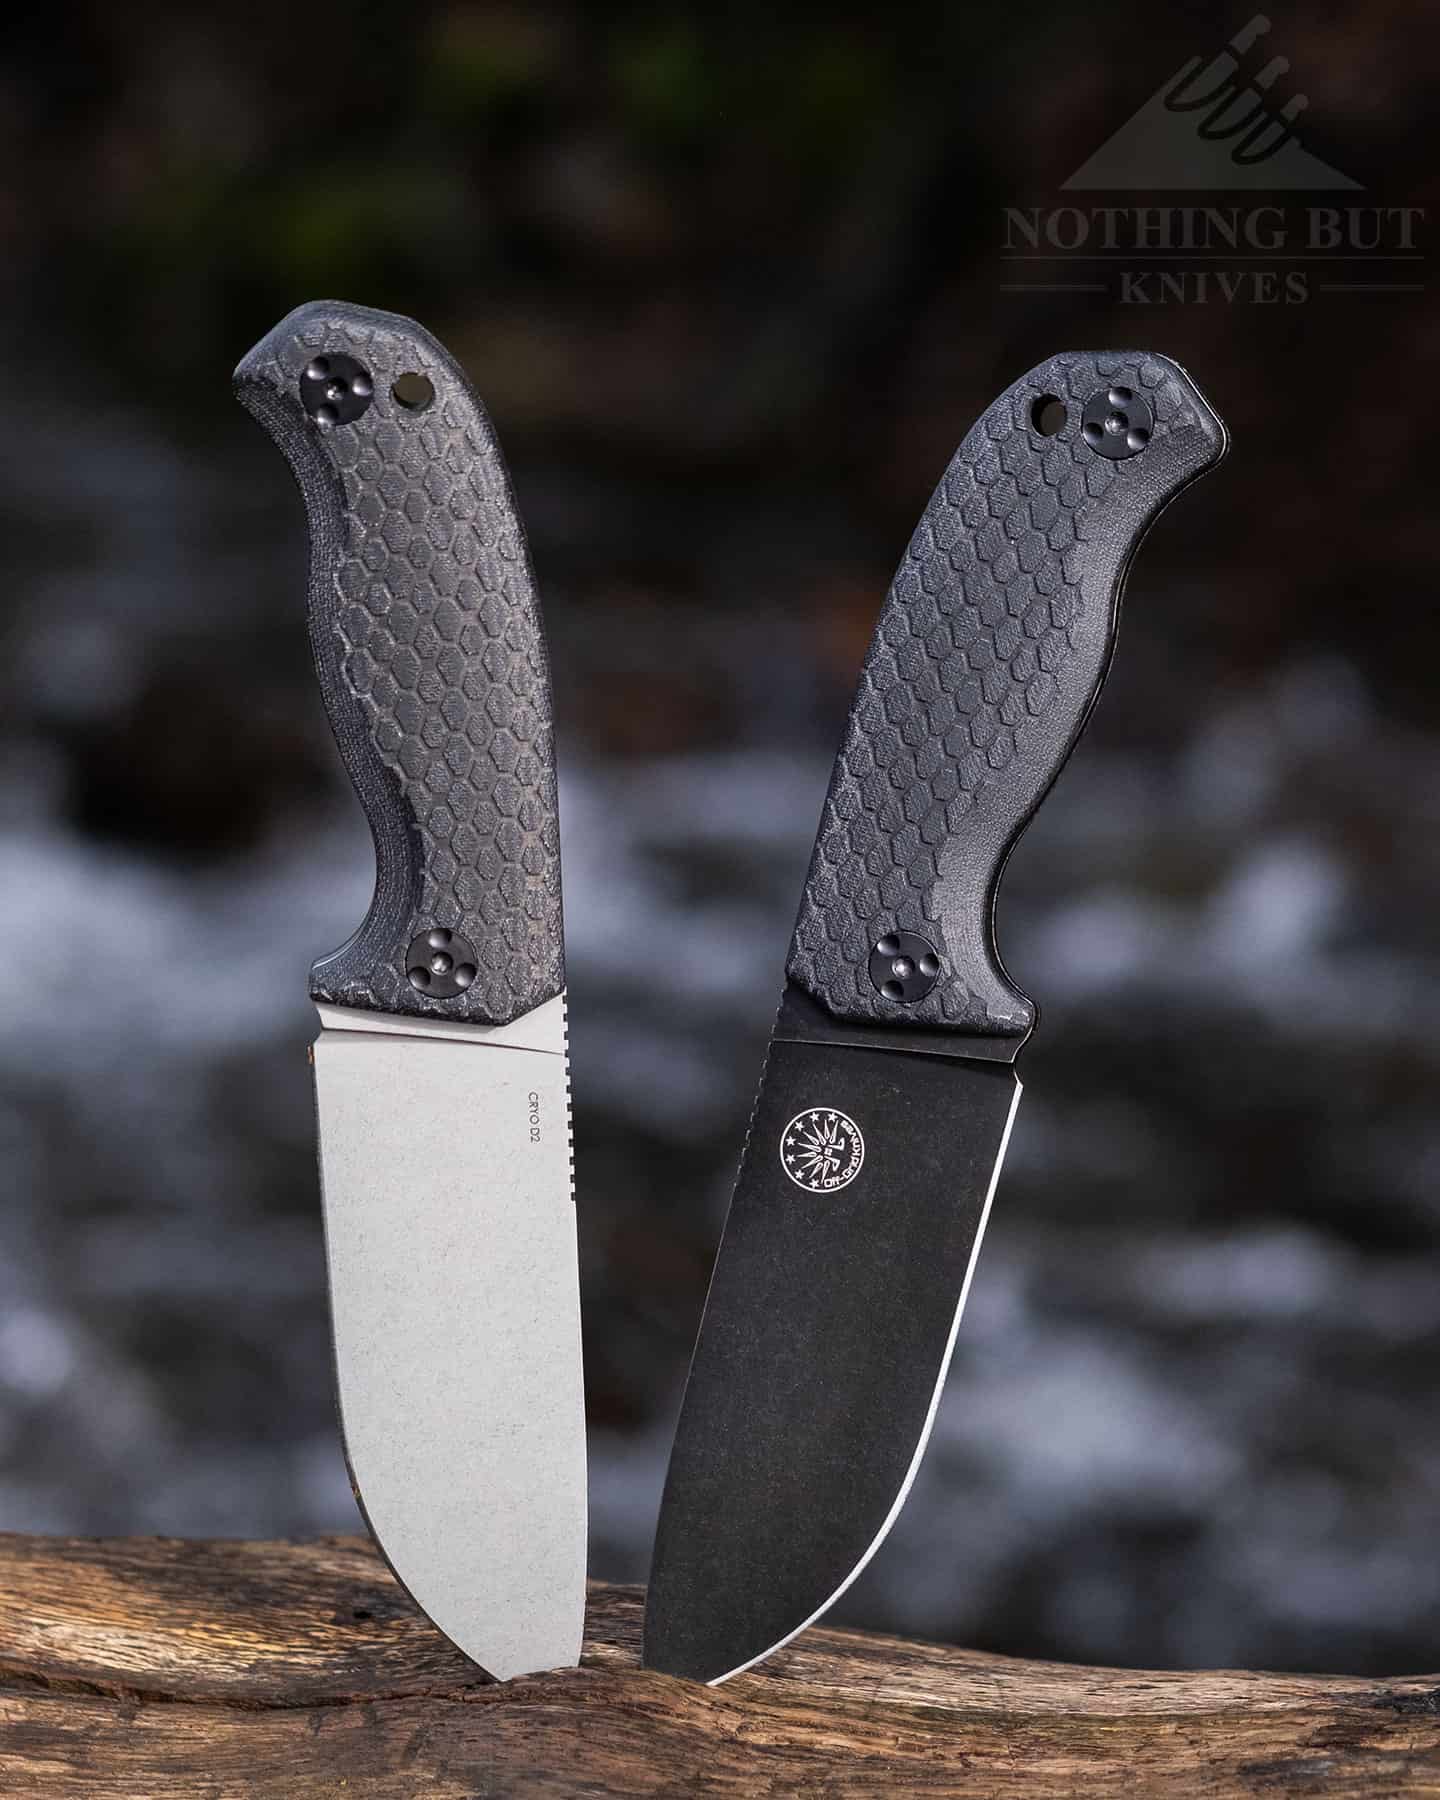 The Cryo D2 steel blade of the Tracker-X2 is available in two different finishes. 